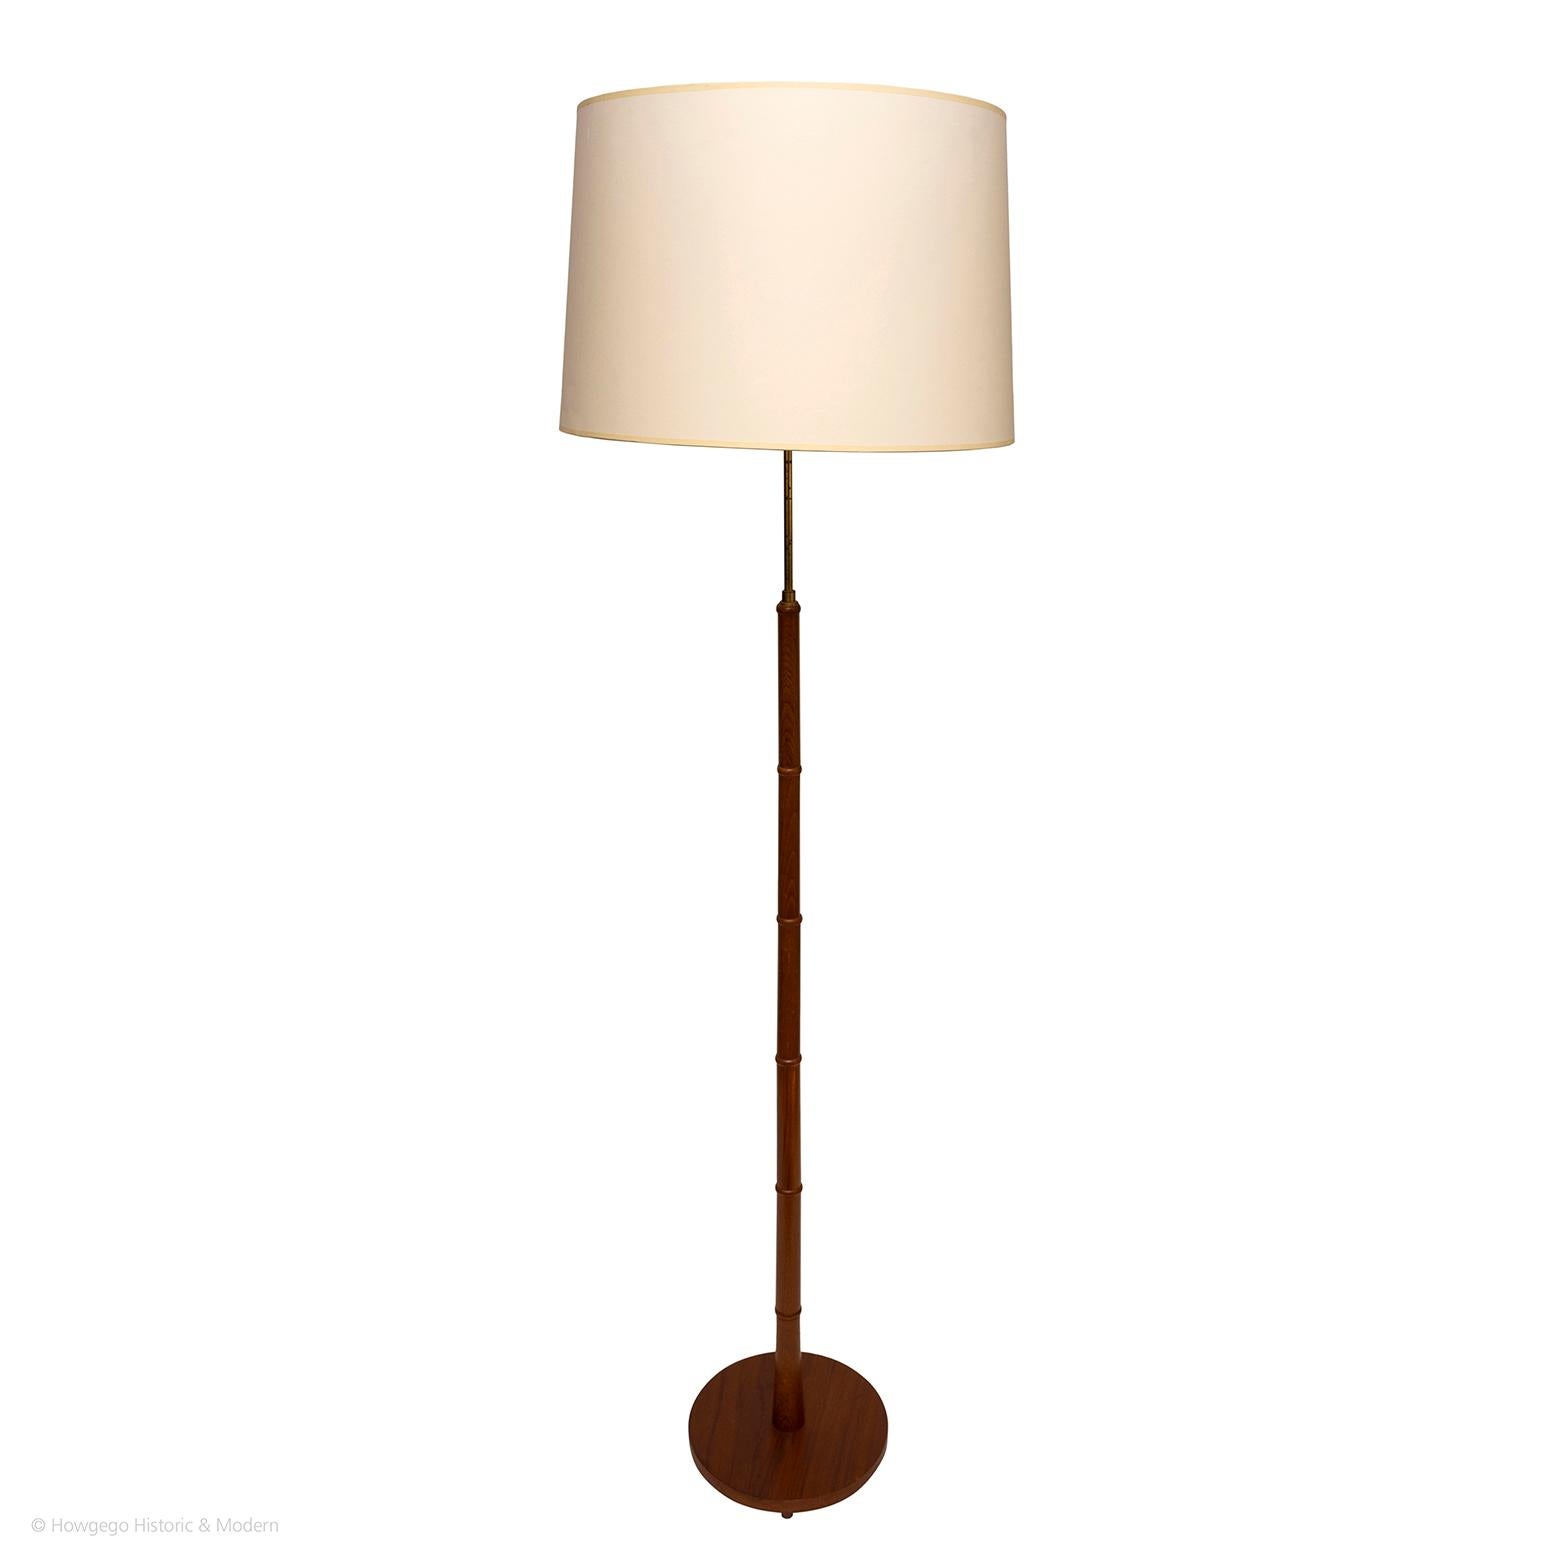 A Fine, Mid-Century Modern, DANISH, TEAK & BRASS FLOOR STANDING LAMP, 137cm, 4ft 6” high

- The tapering stem is decorated with rings and the turning displays the Fine figuring of the teak as does the circular base.
- Blends and sits comfortably